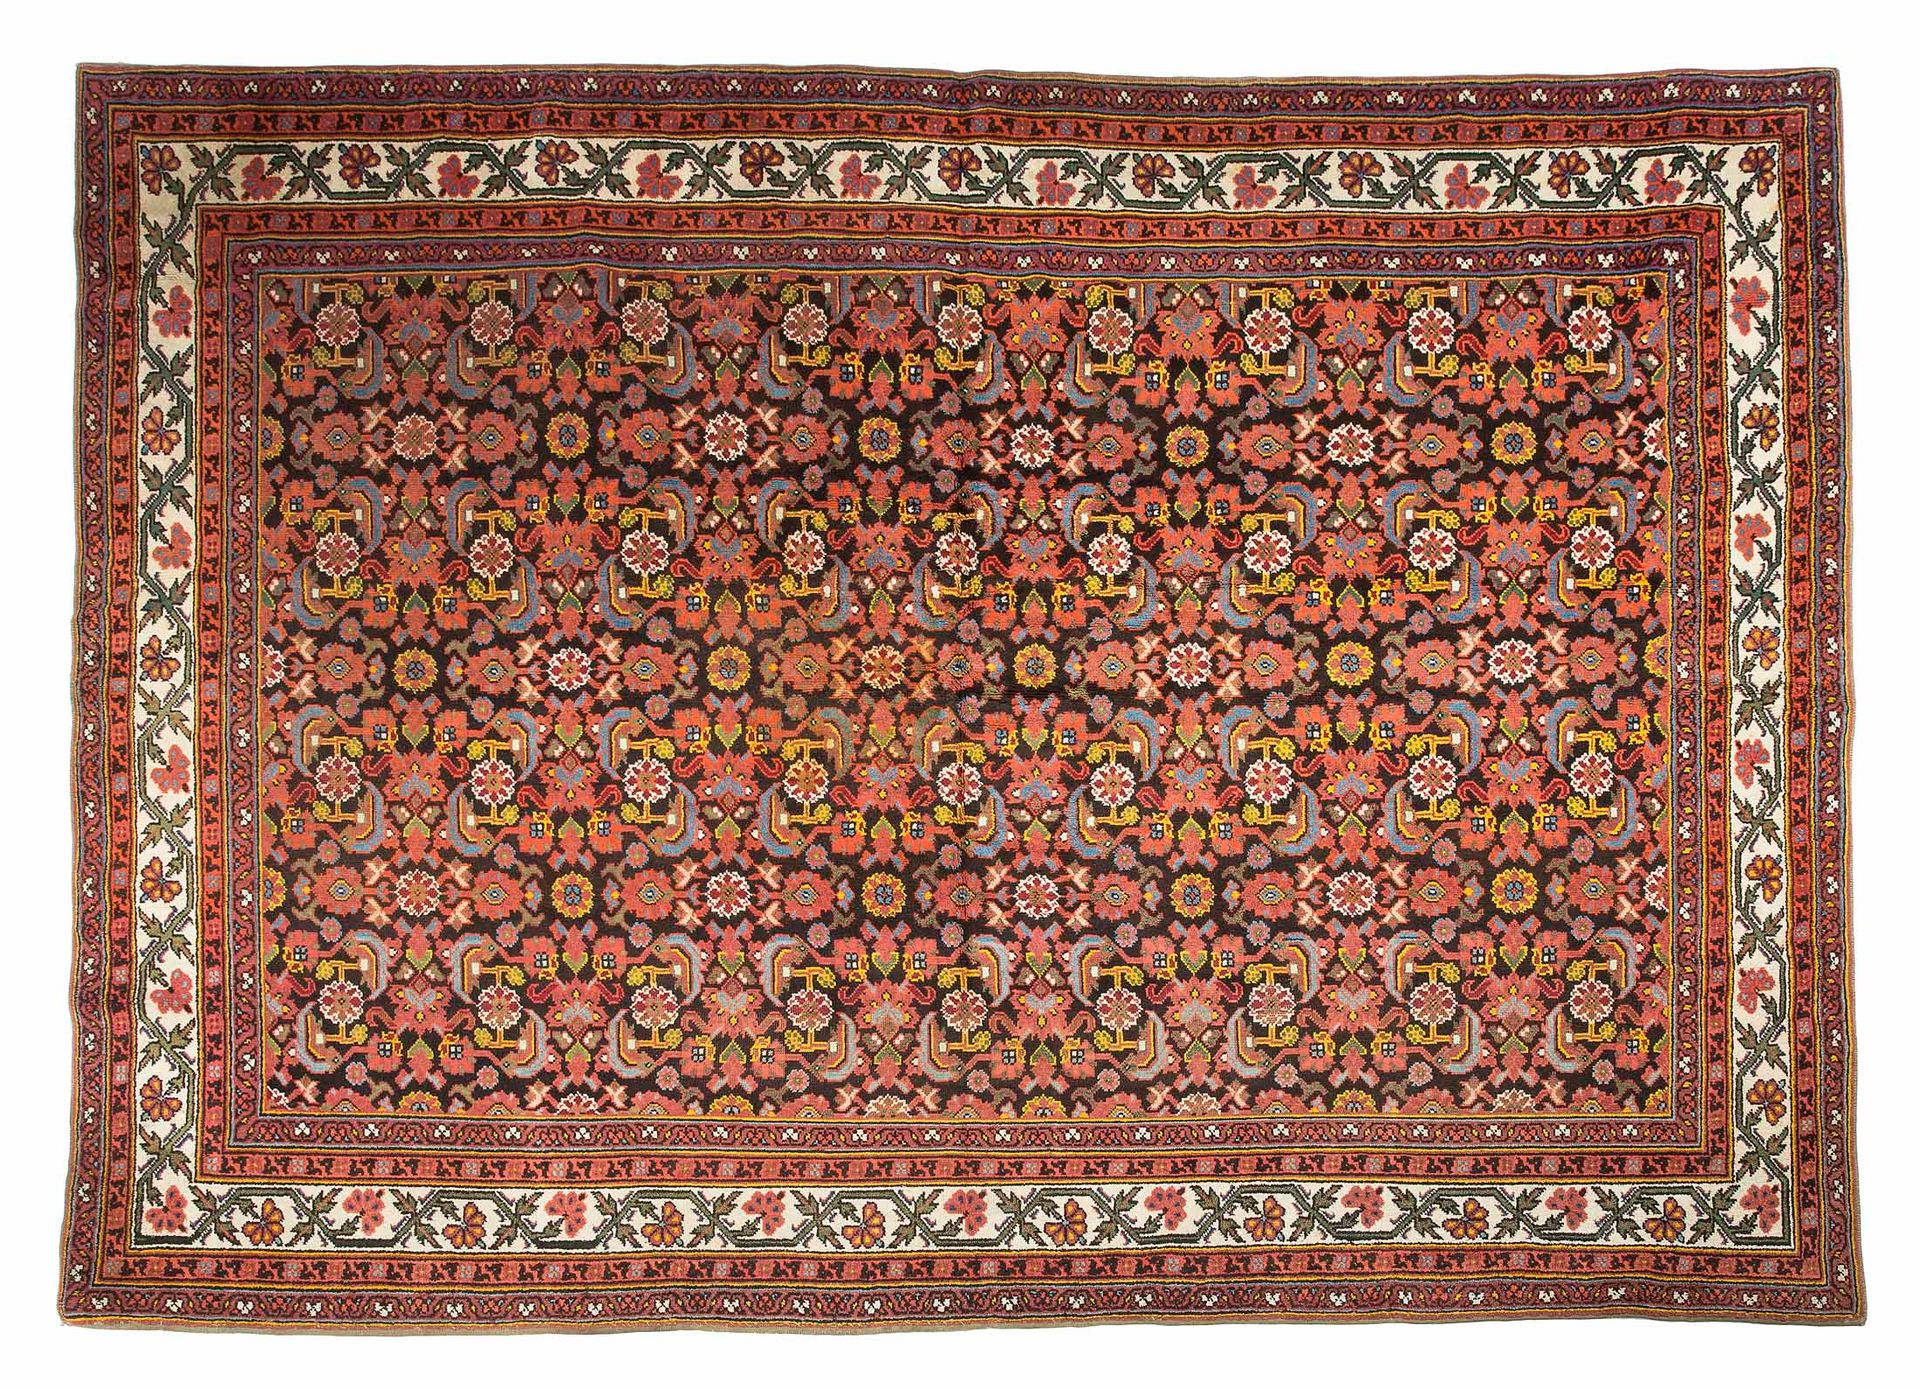 Null MIRZAPOUR carpet (India), end of the 19th century

Dimensions : 305 x 230cm&hellip;